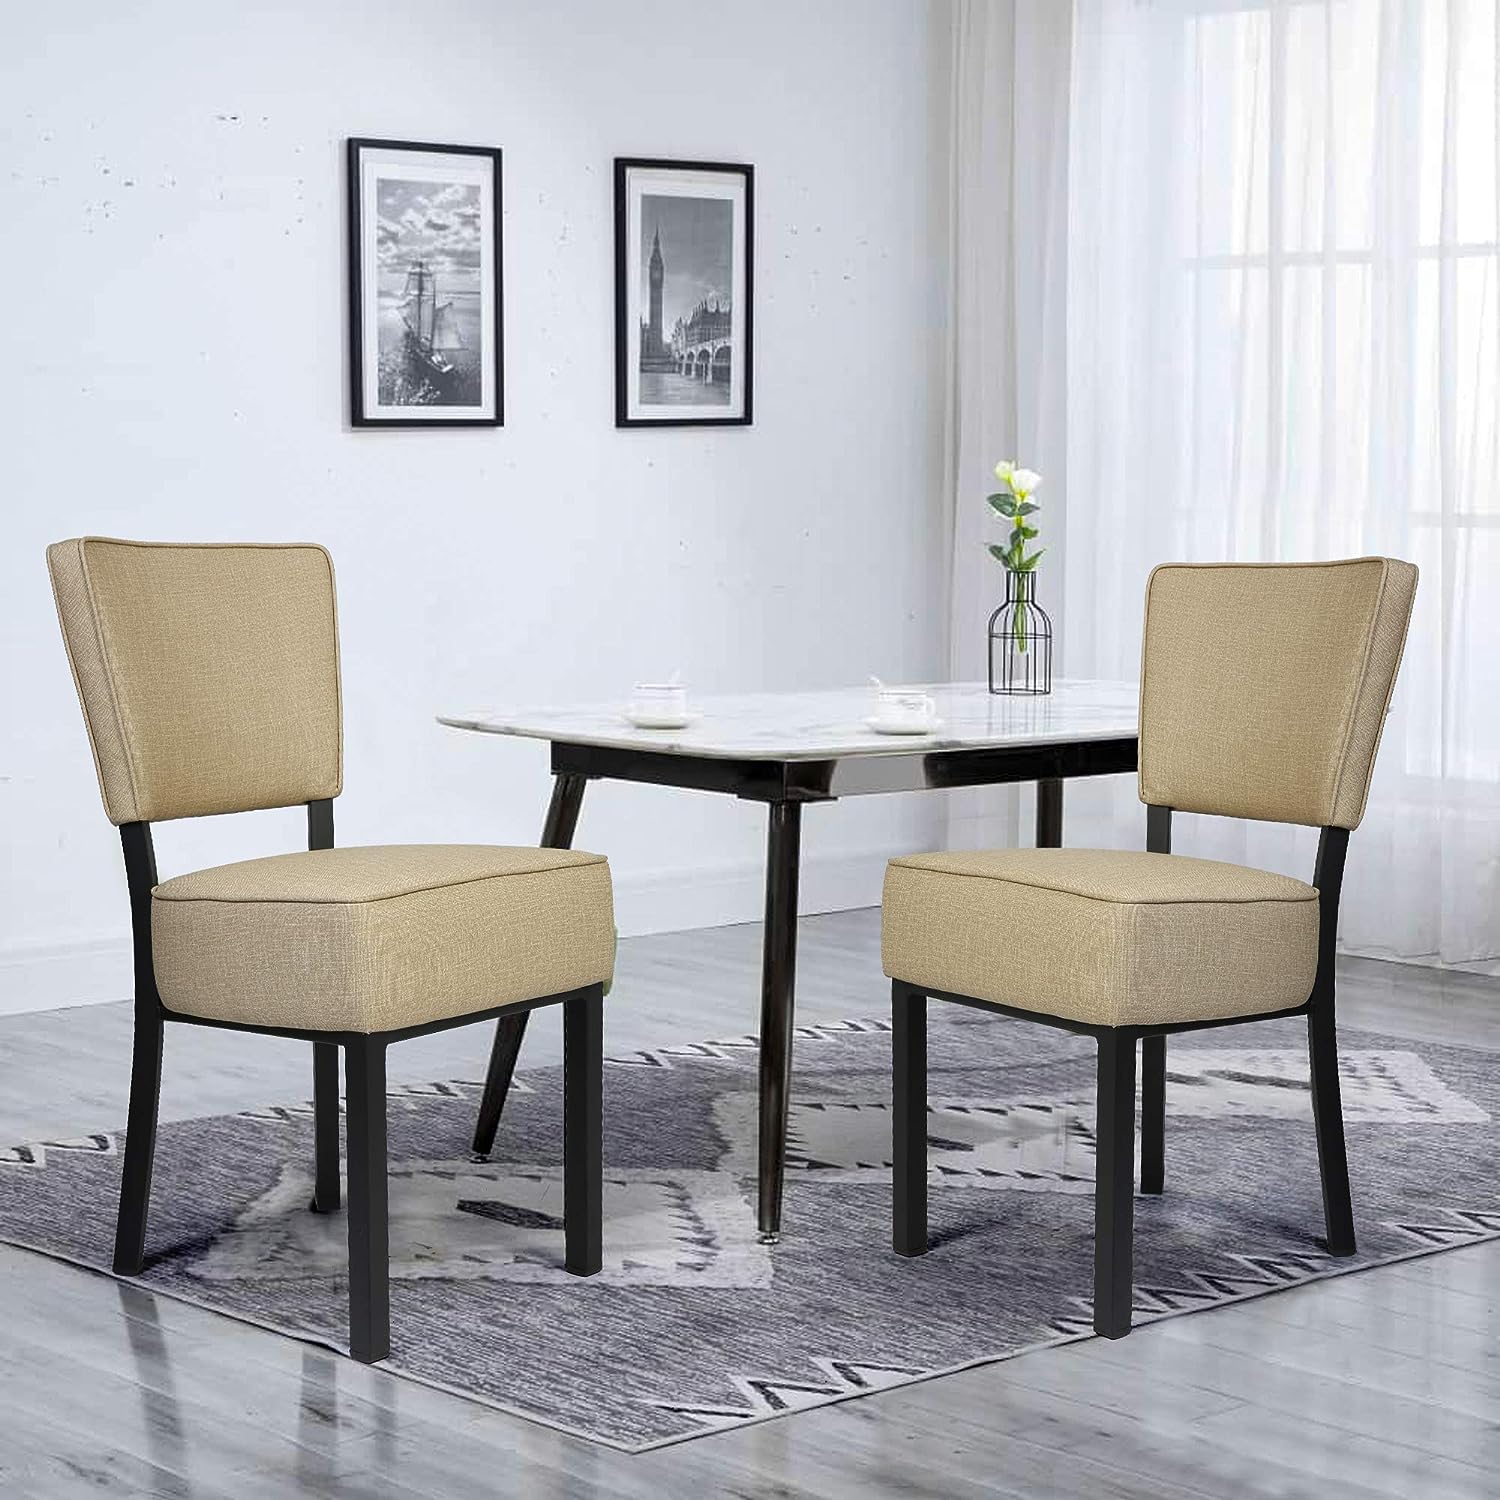 LUCKYERMORE Set of 2 Kitchen Dining Chairs PU Leather Side Chairs with Soft Cushion, Beige